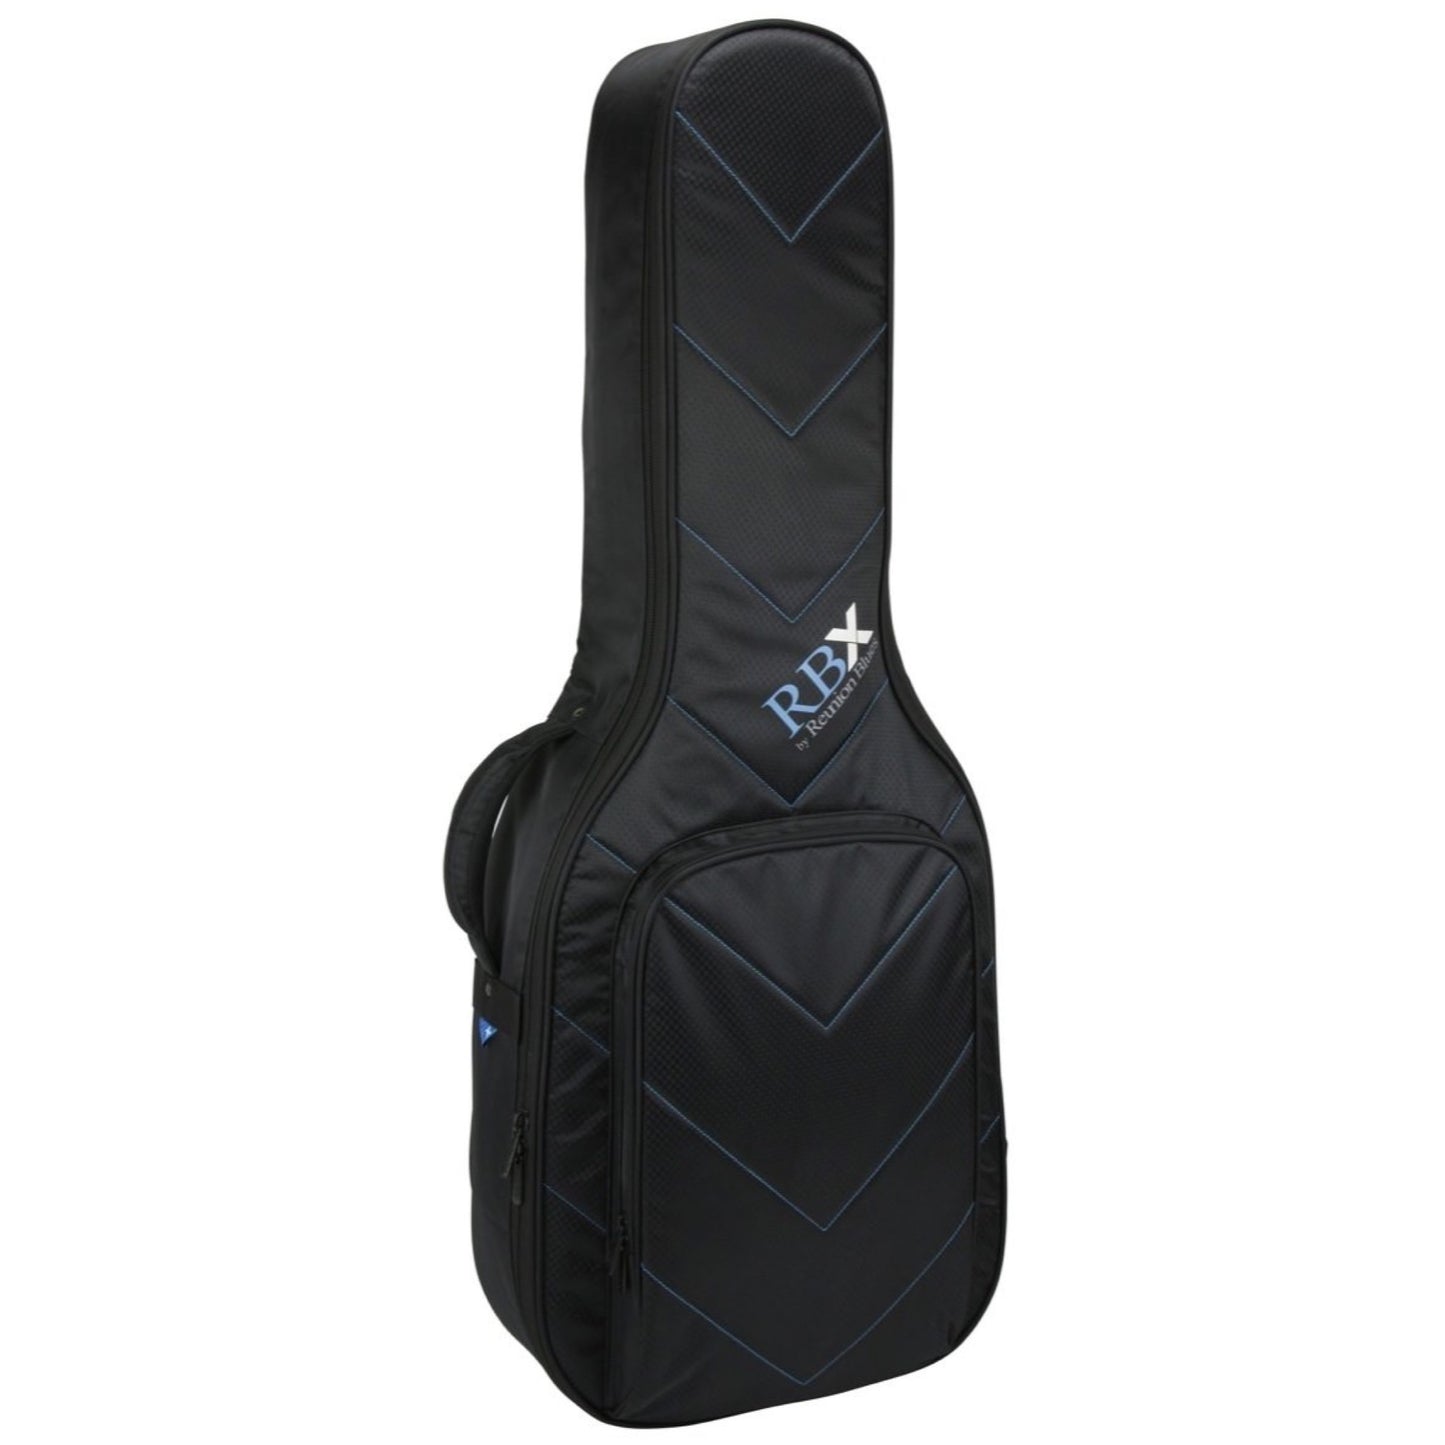 Reunion Blues RBXC3 Small Body Acoustic Guitar Bag